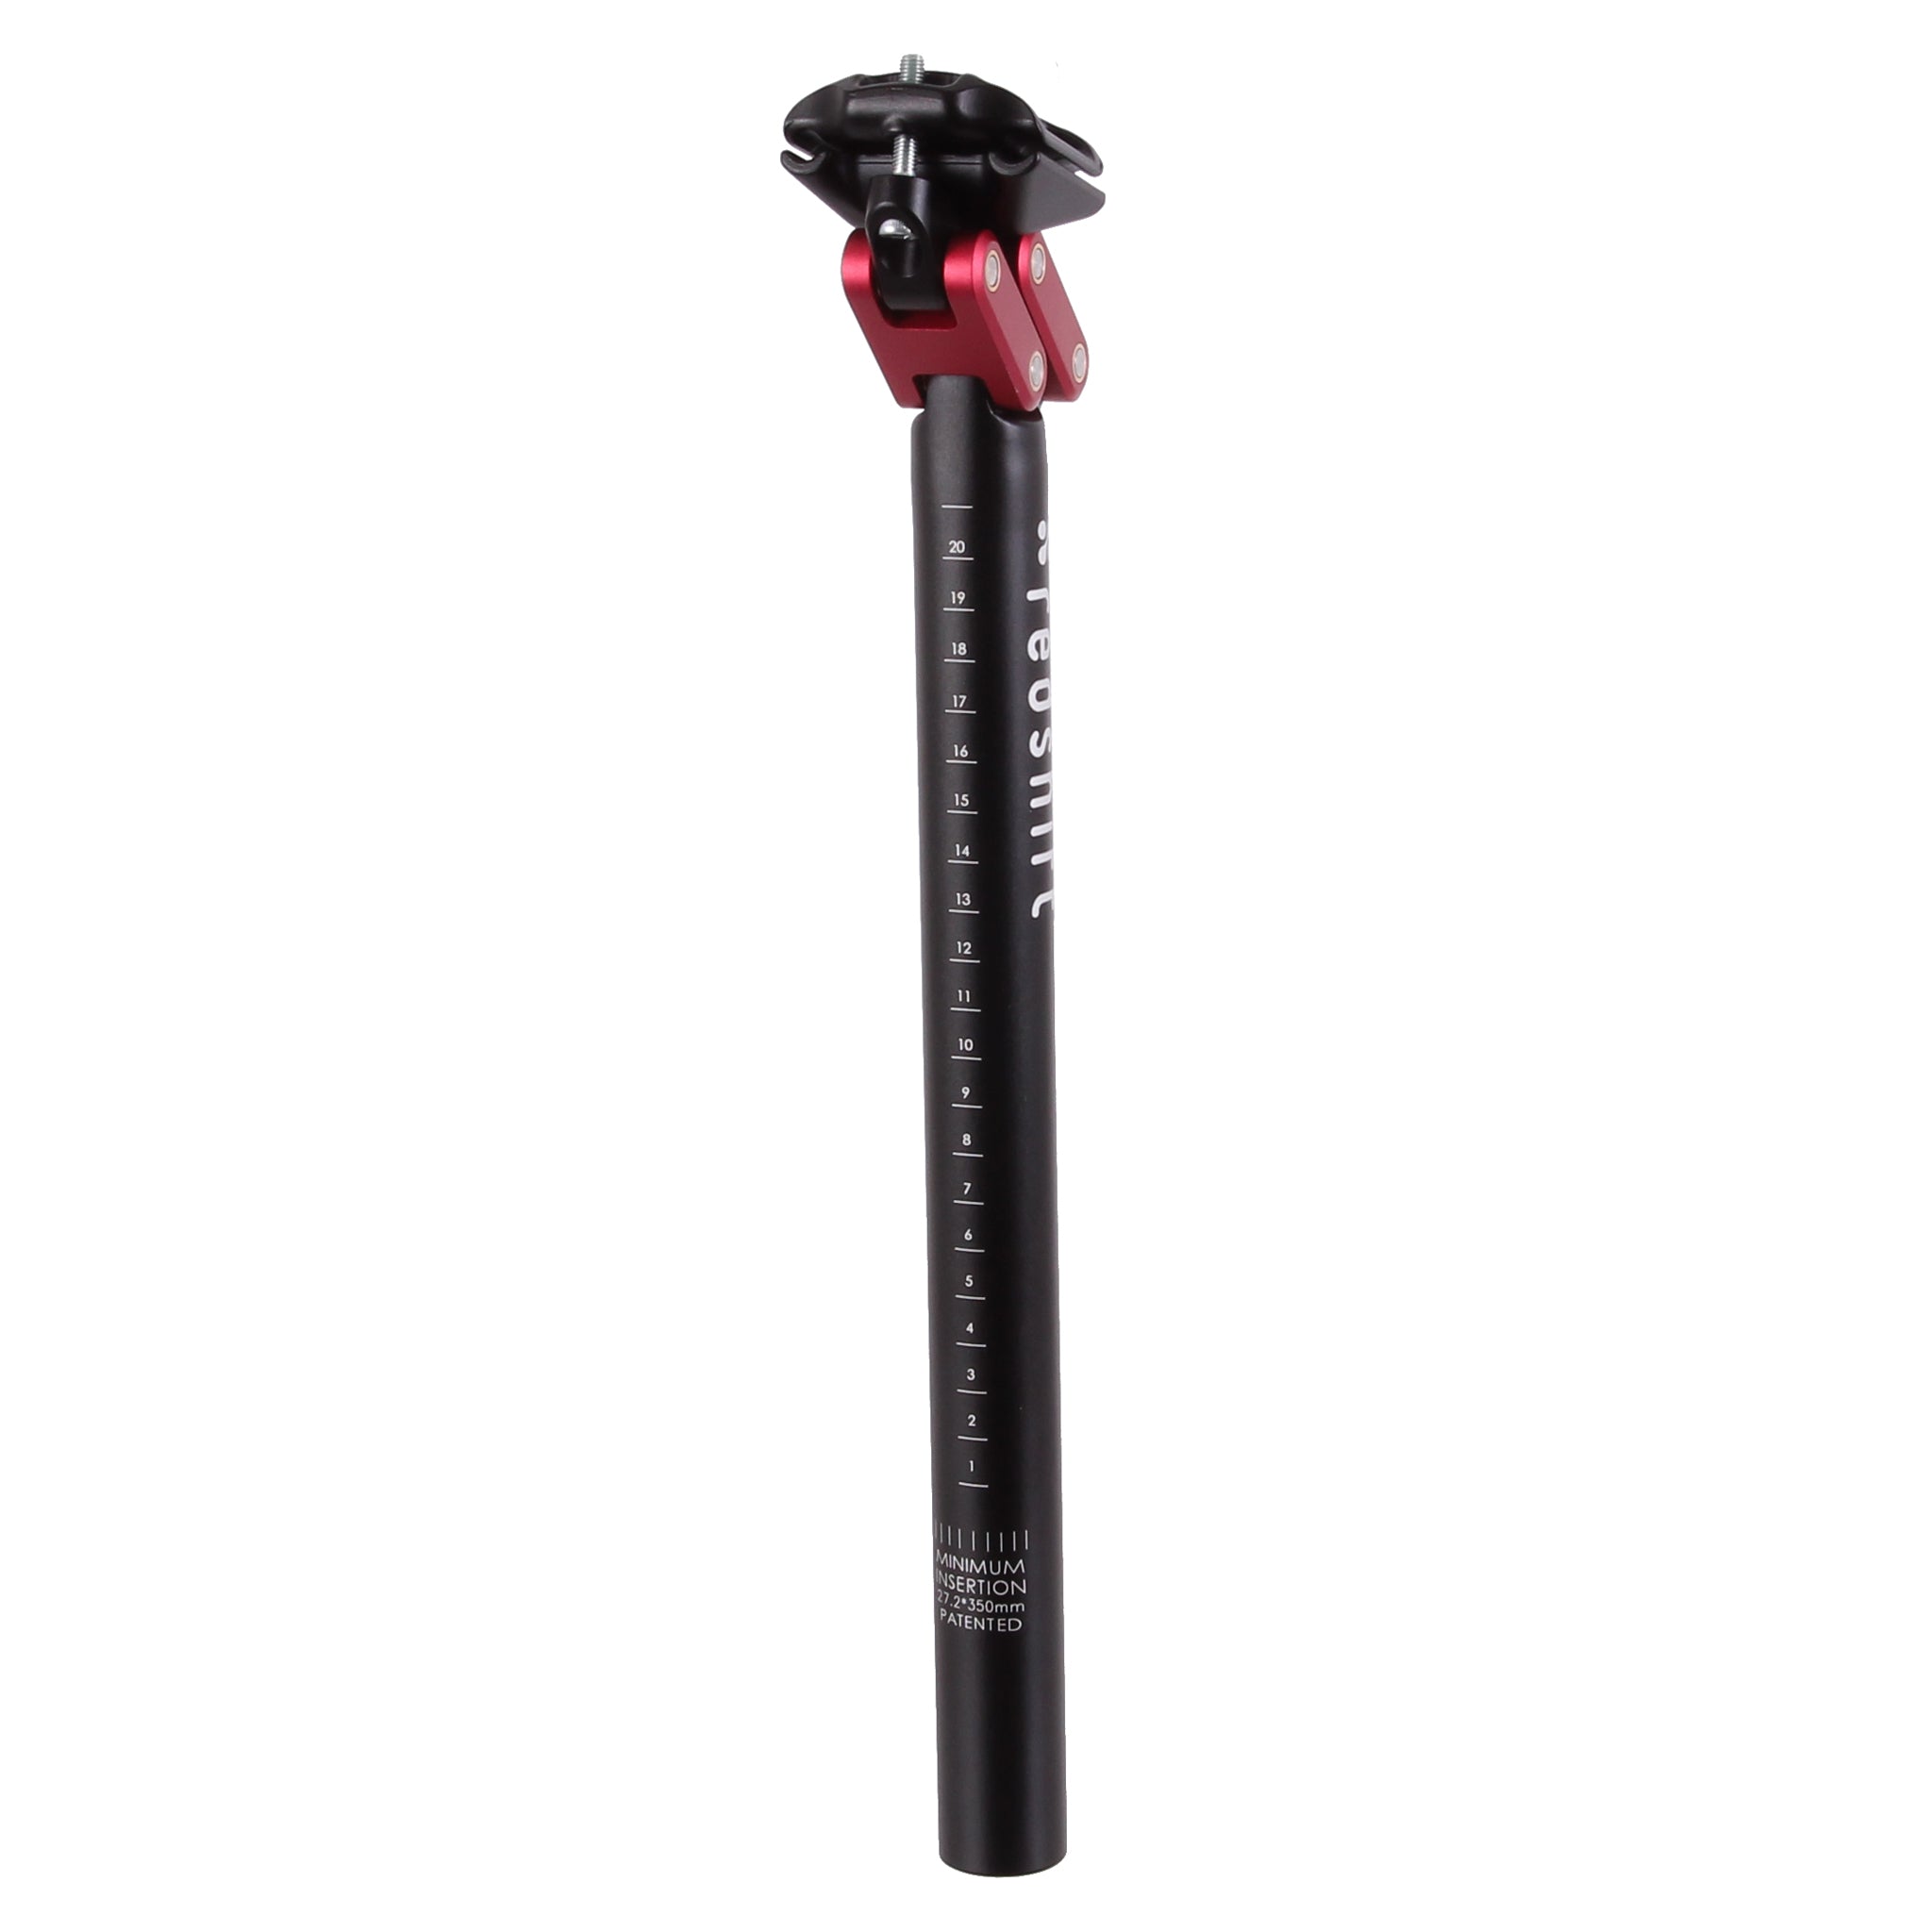 Redshift Sports Dual Position Seatpost 27.2 x 350mm - Red